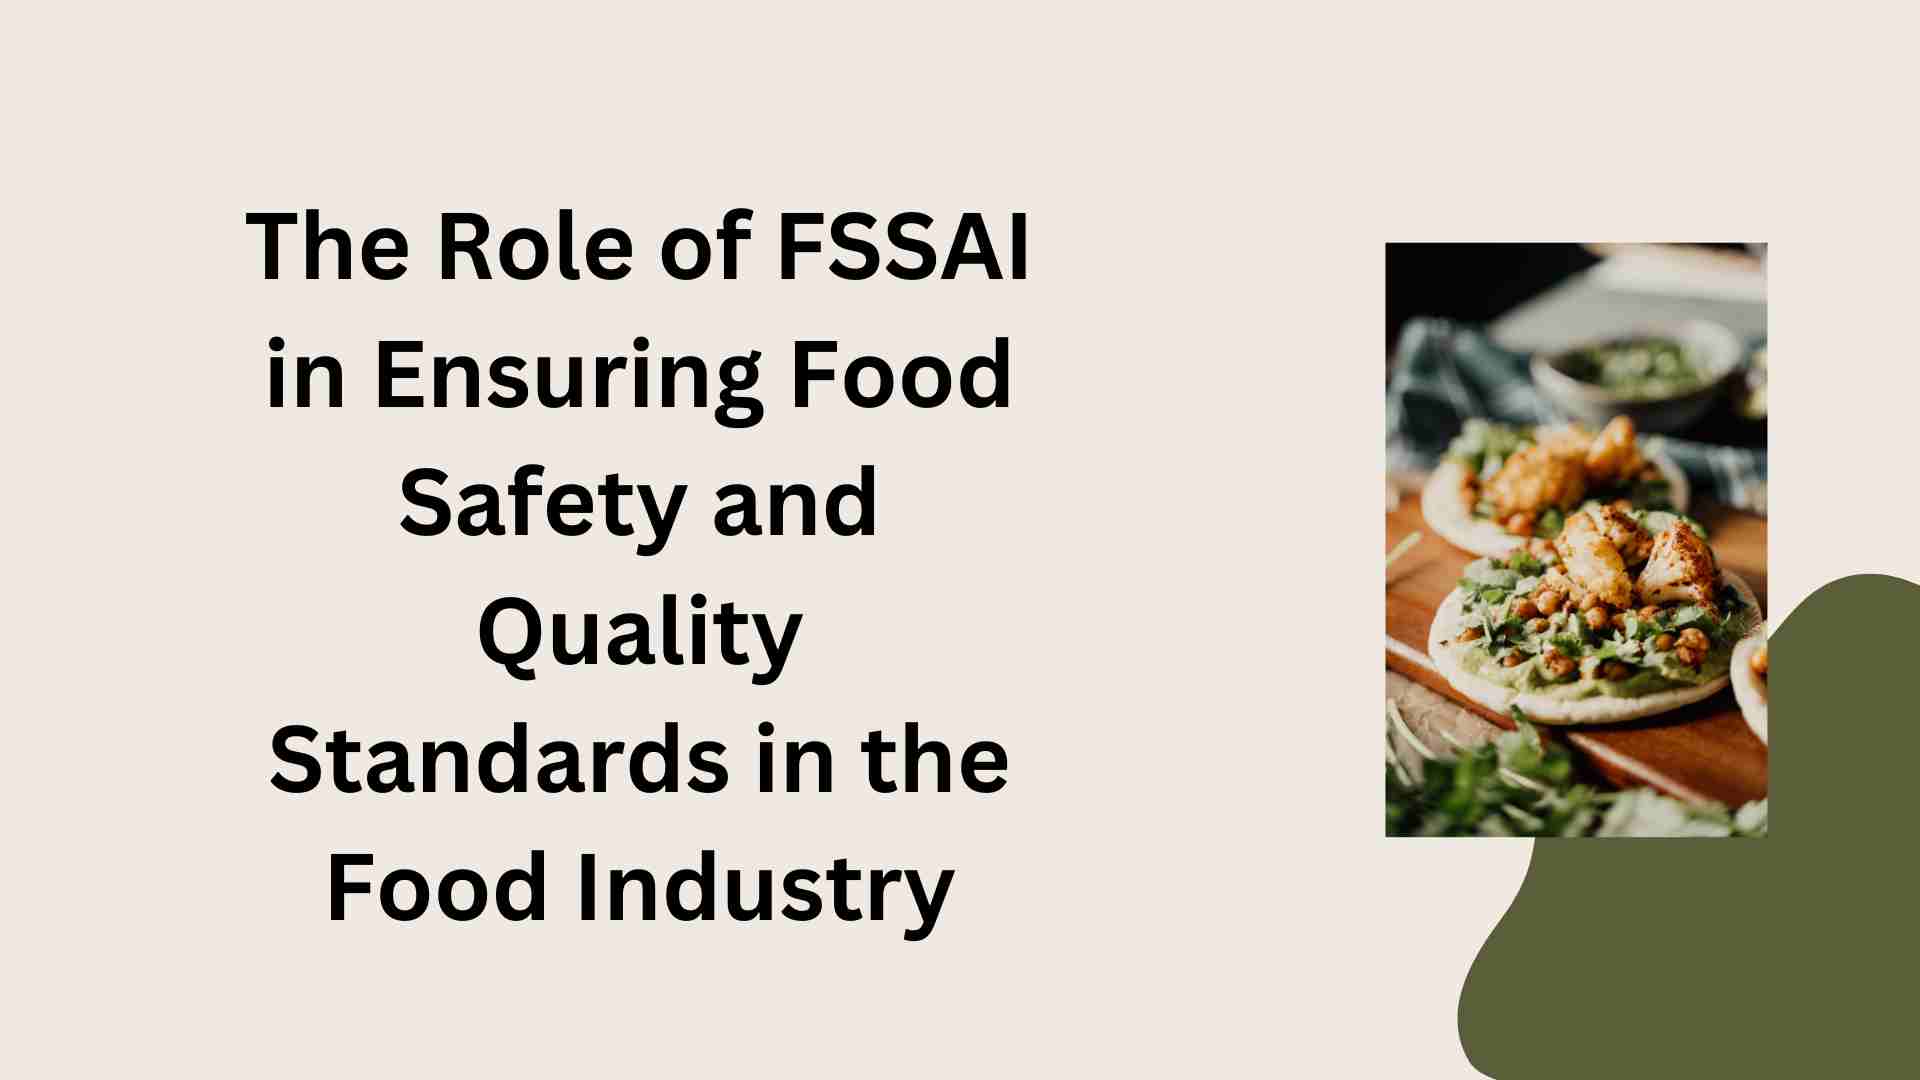 The Role of FSSAI in Ensuring Food Safety and Quality Standards in the Food Industry